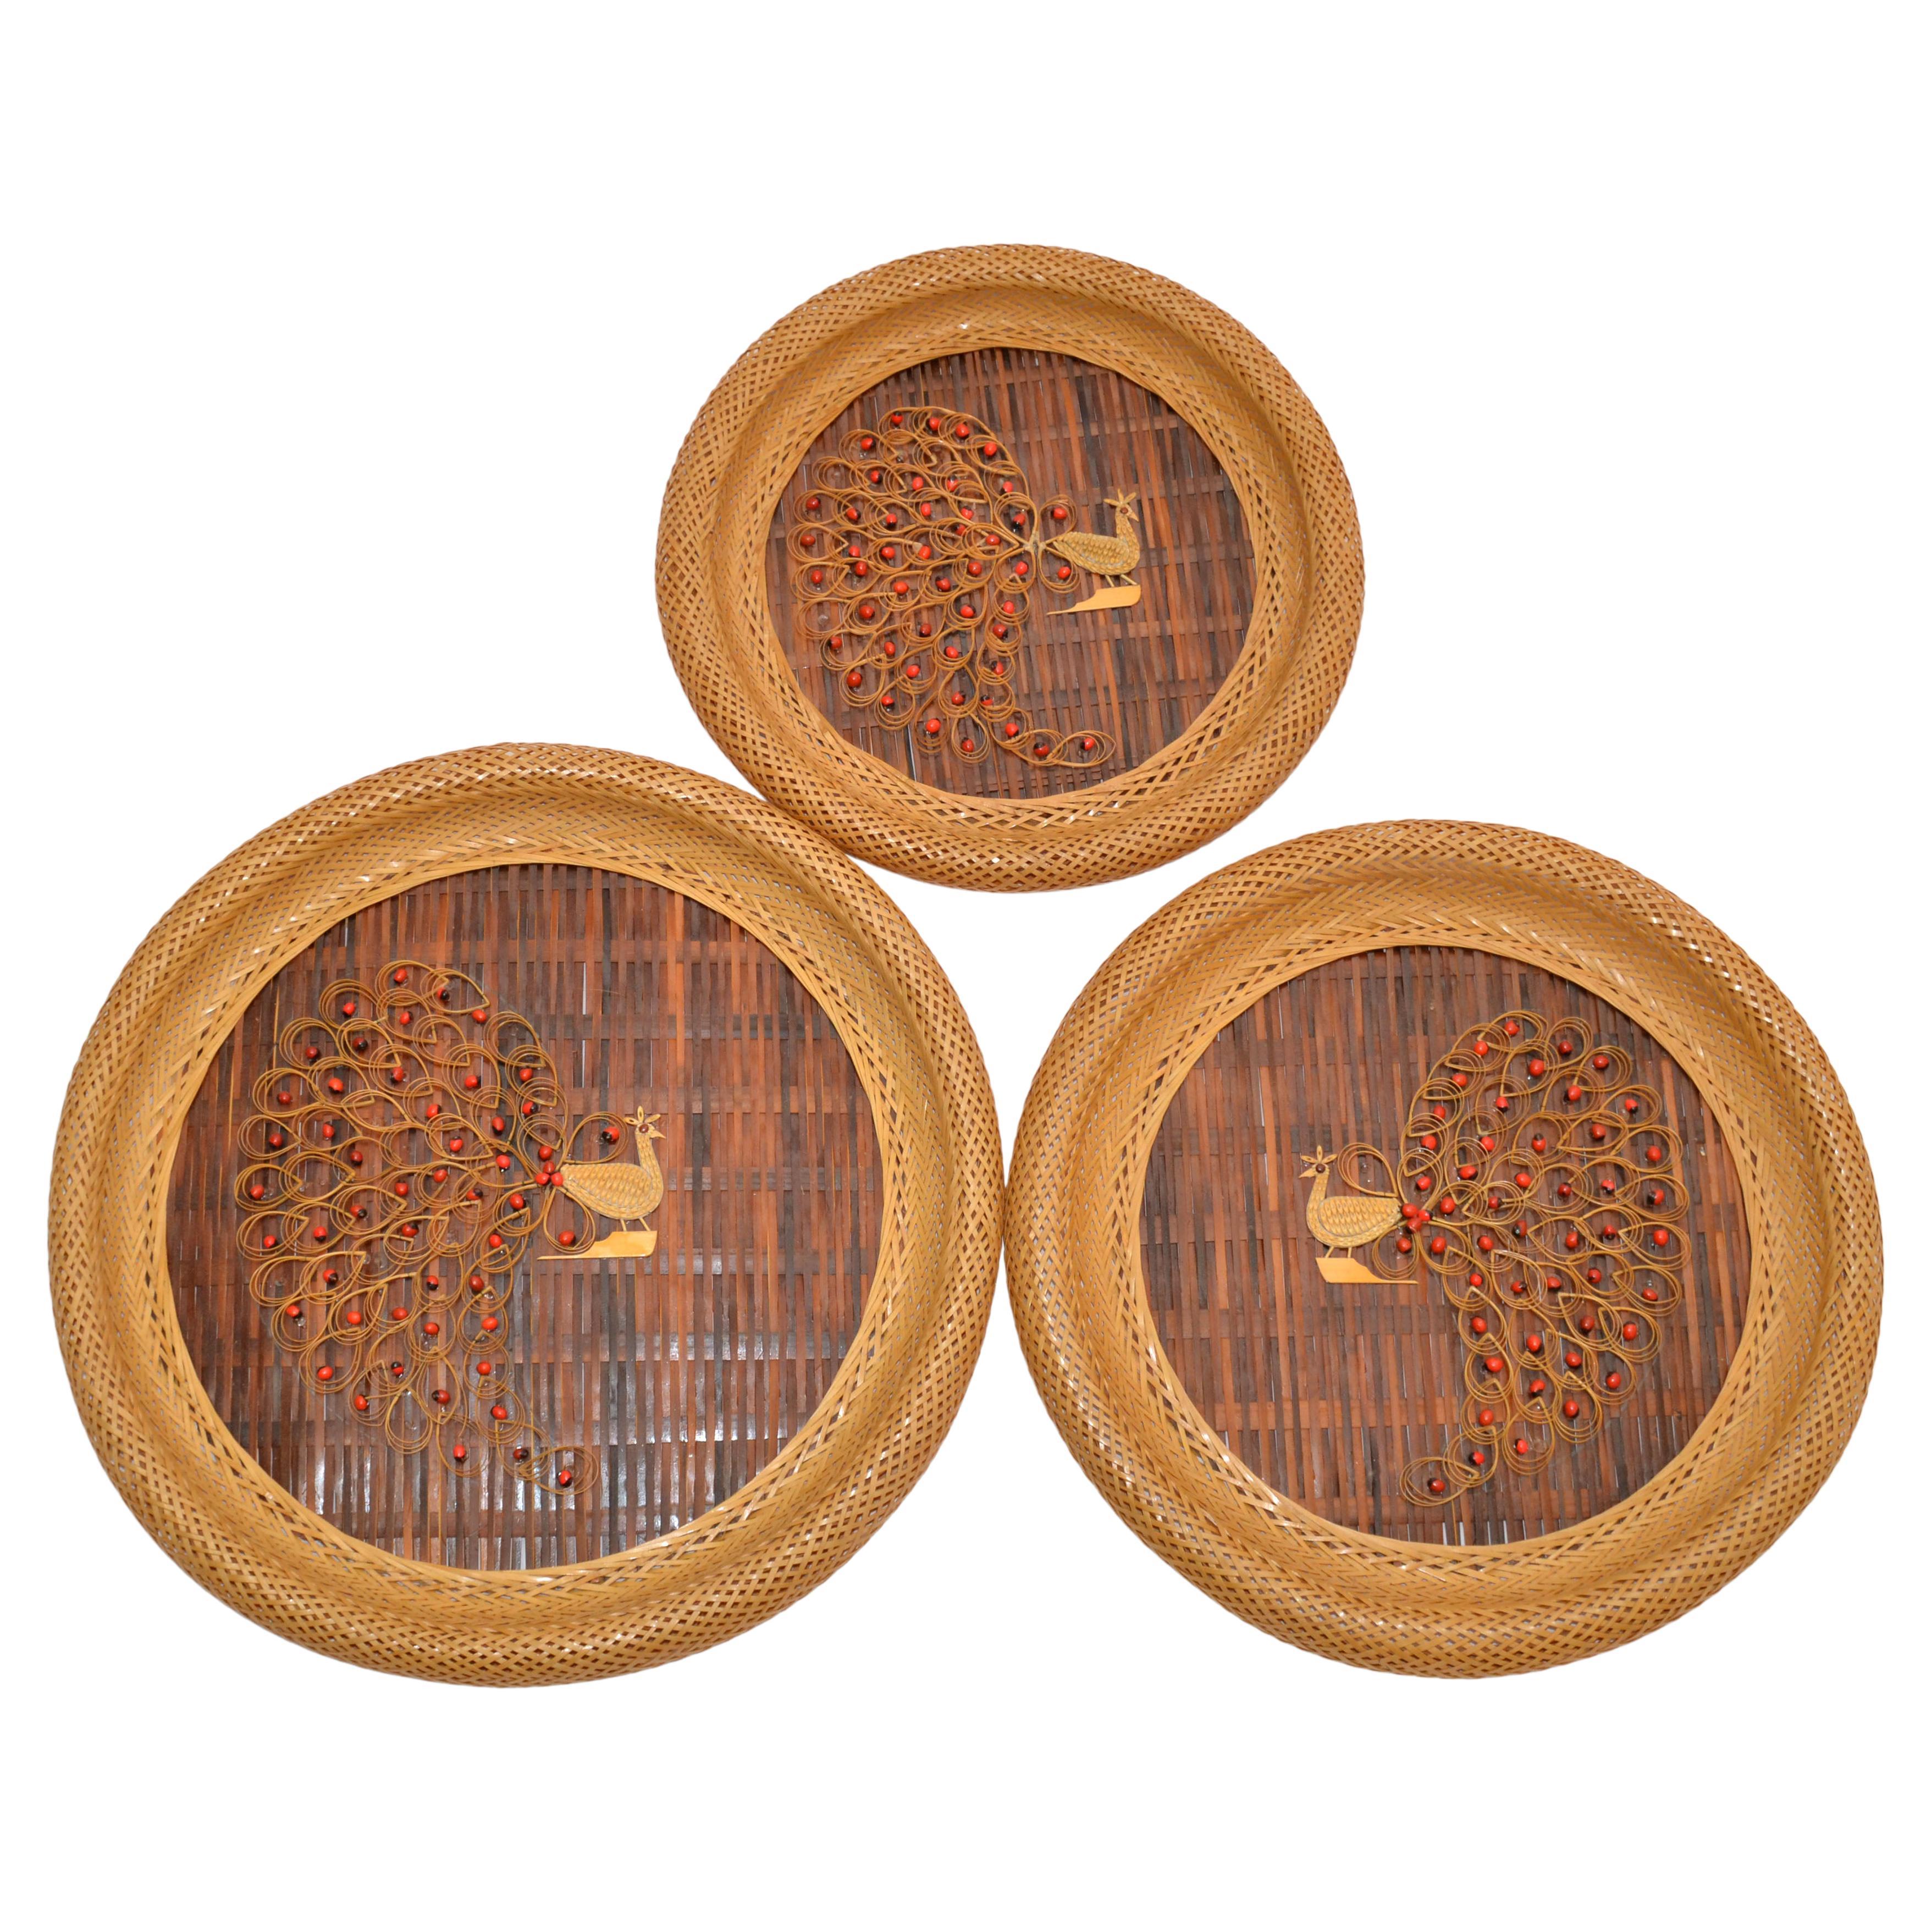 3 Nesting Decorative Handcrafted Cane & Rattan Beaded Wall Plates Peacock Motif